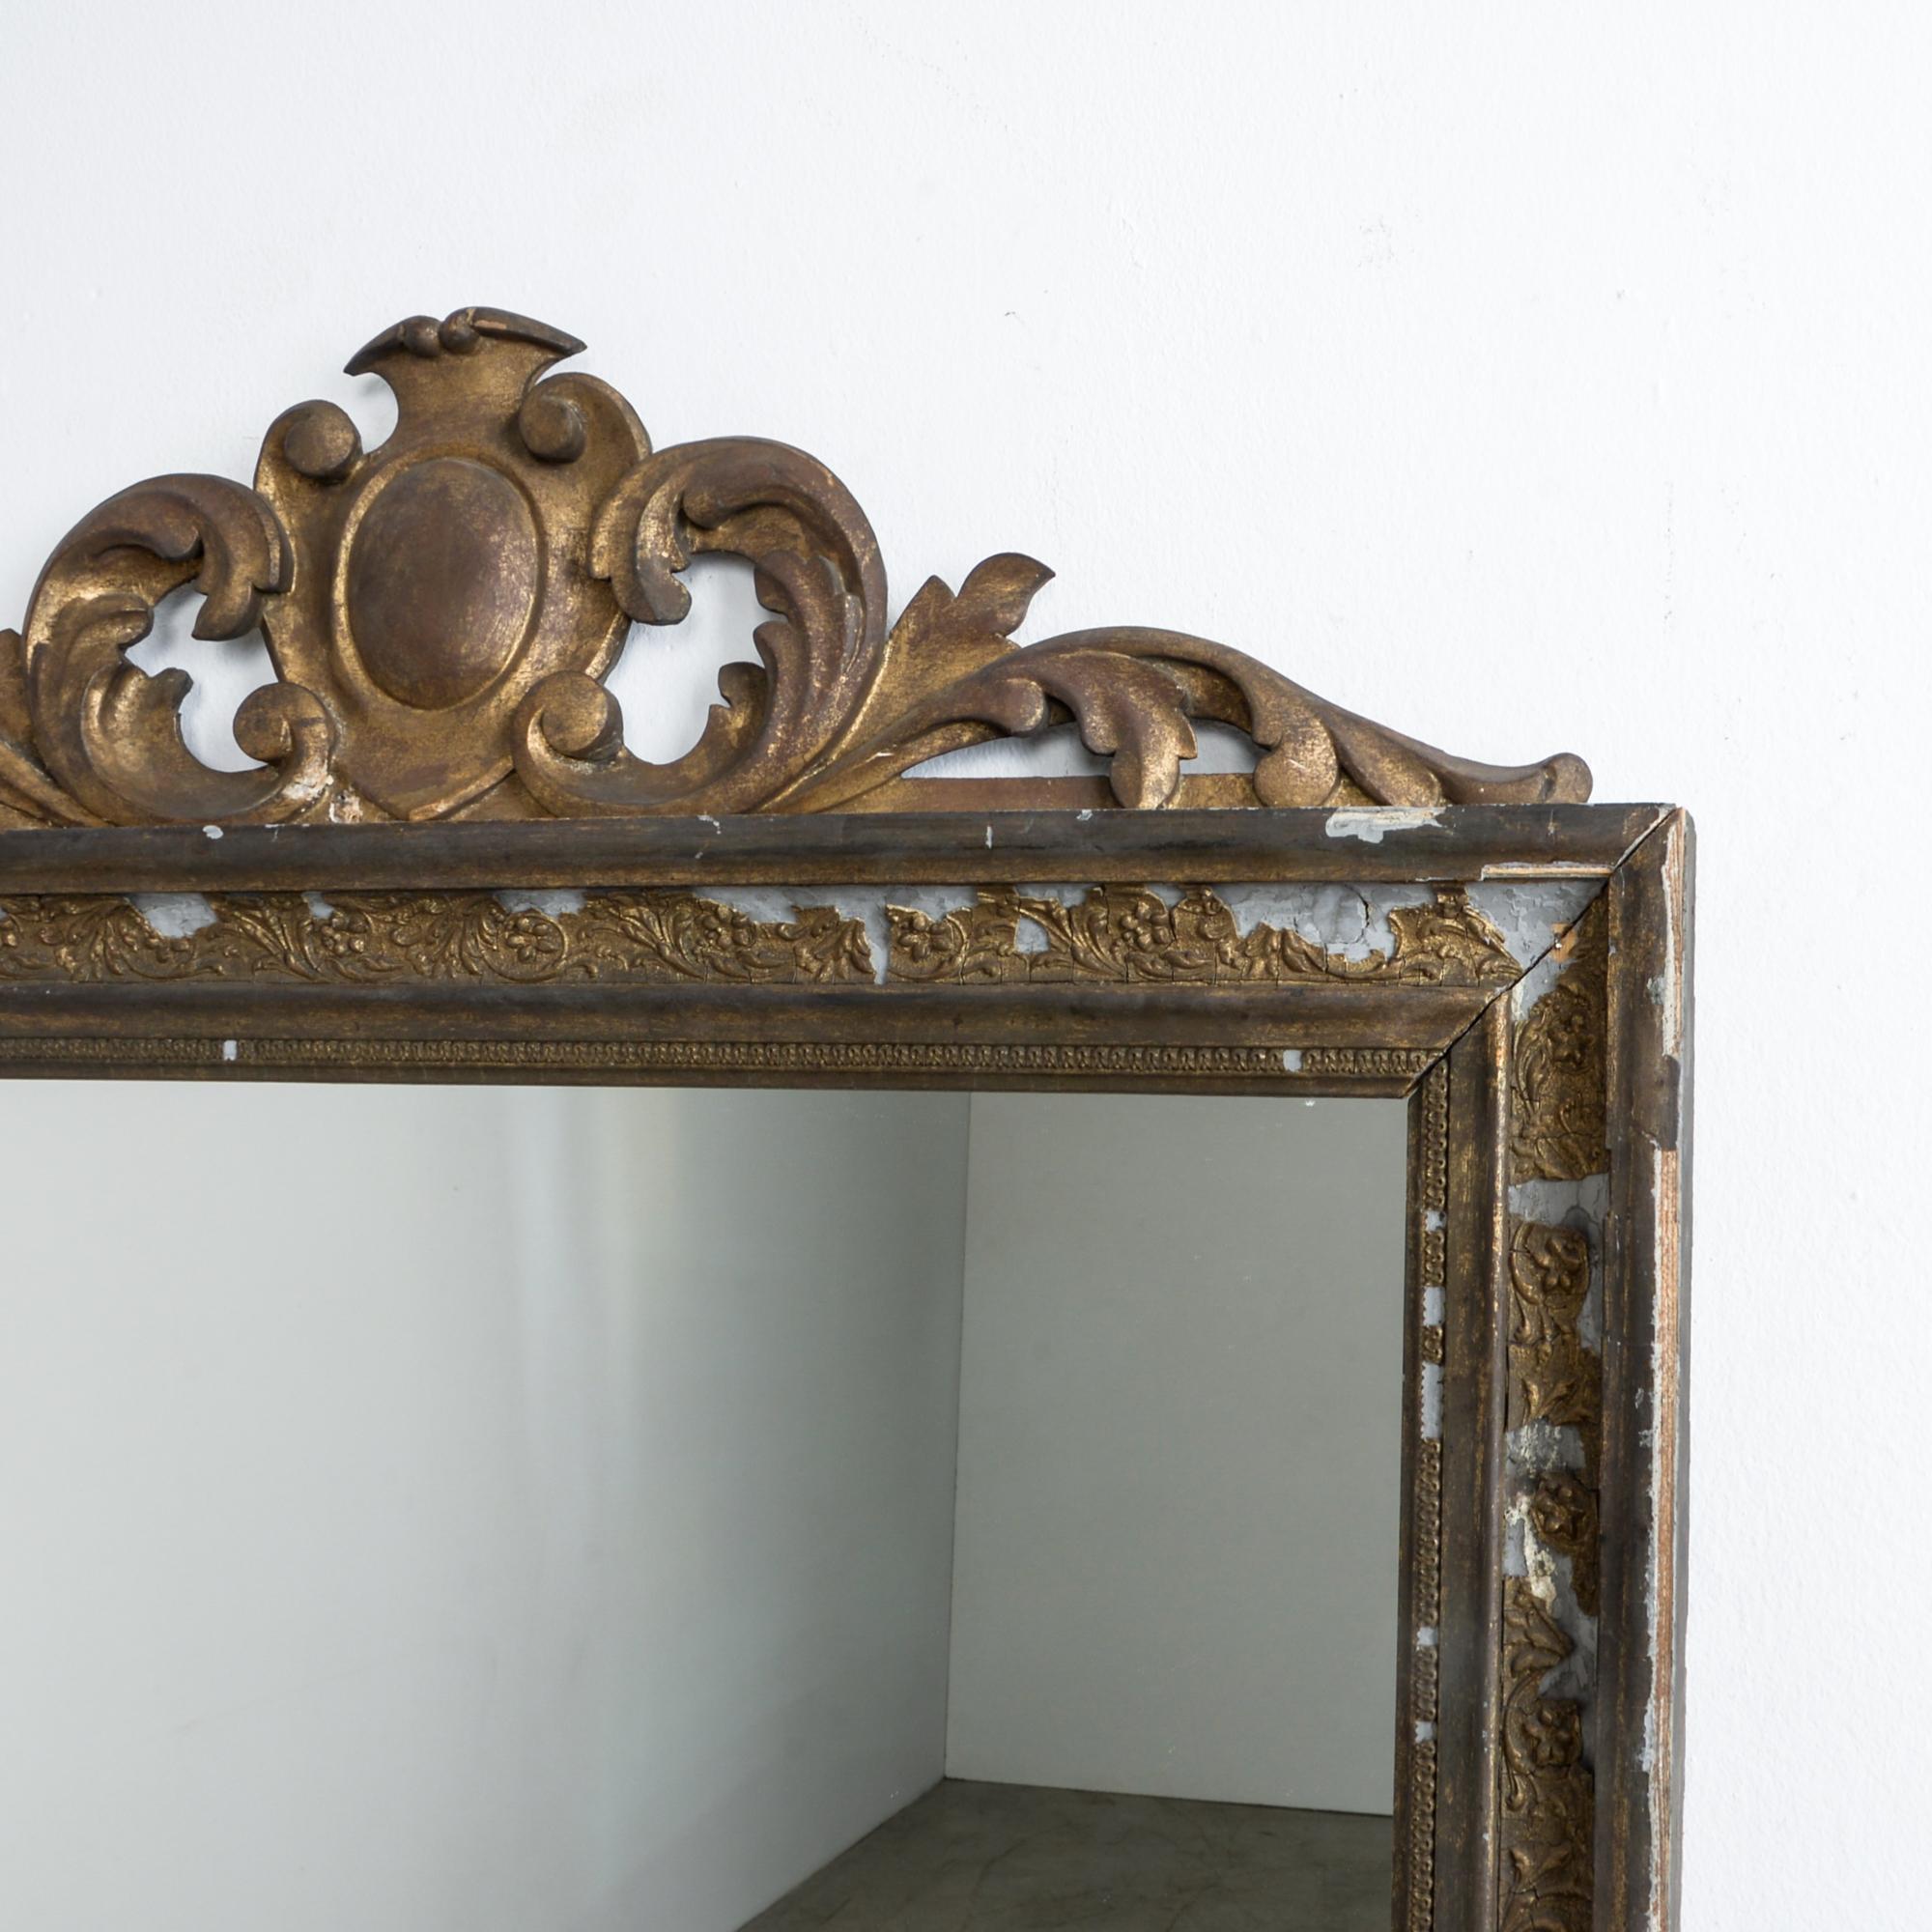 From France, circa 1900. Influenced by the era of French eclecticism, this mirror combines a floral crest motif with decorative plaster work; wrapped in gold leaf, seasoned by time.